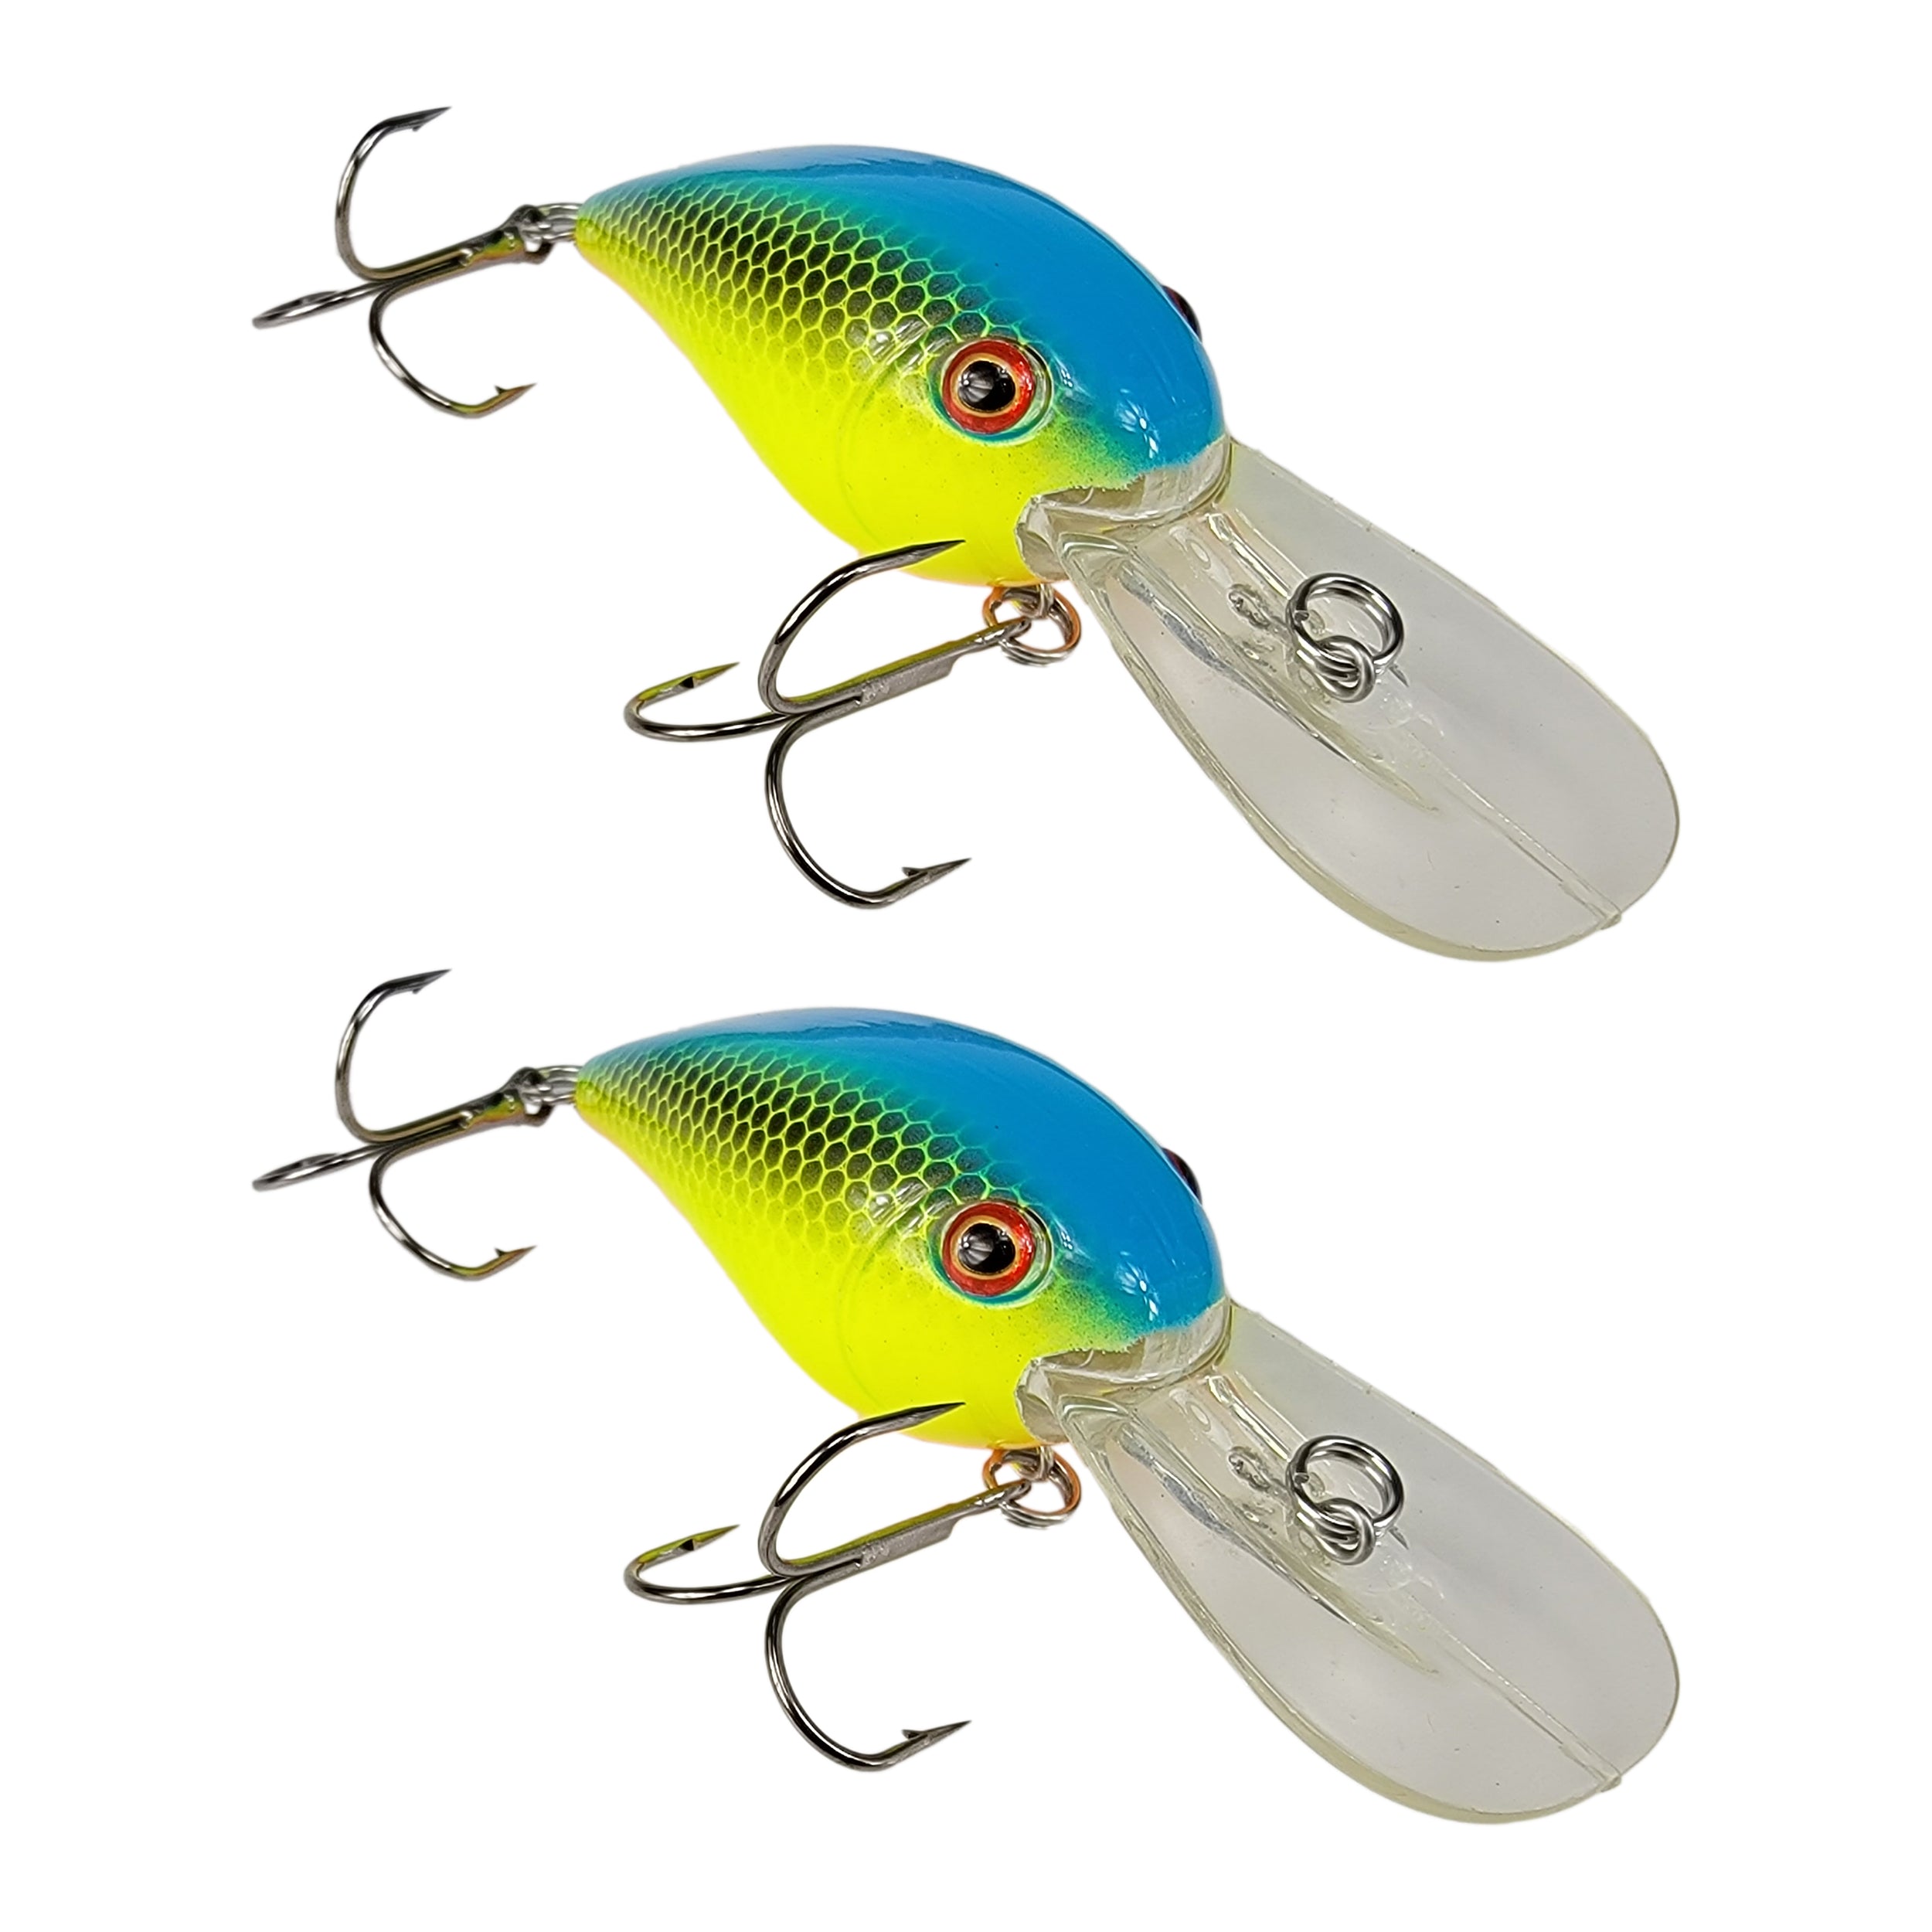 Tackle HD Fiddle-Styx Magnum Jerkbait 2 Pack - Ayu